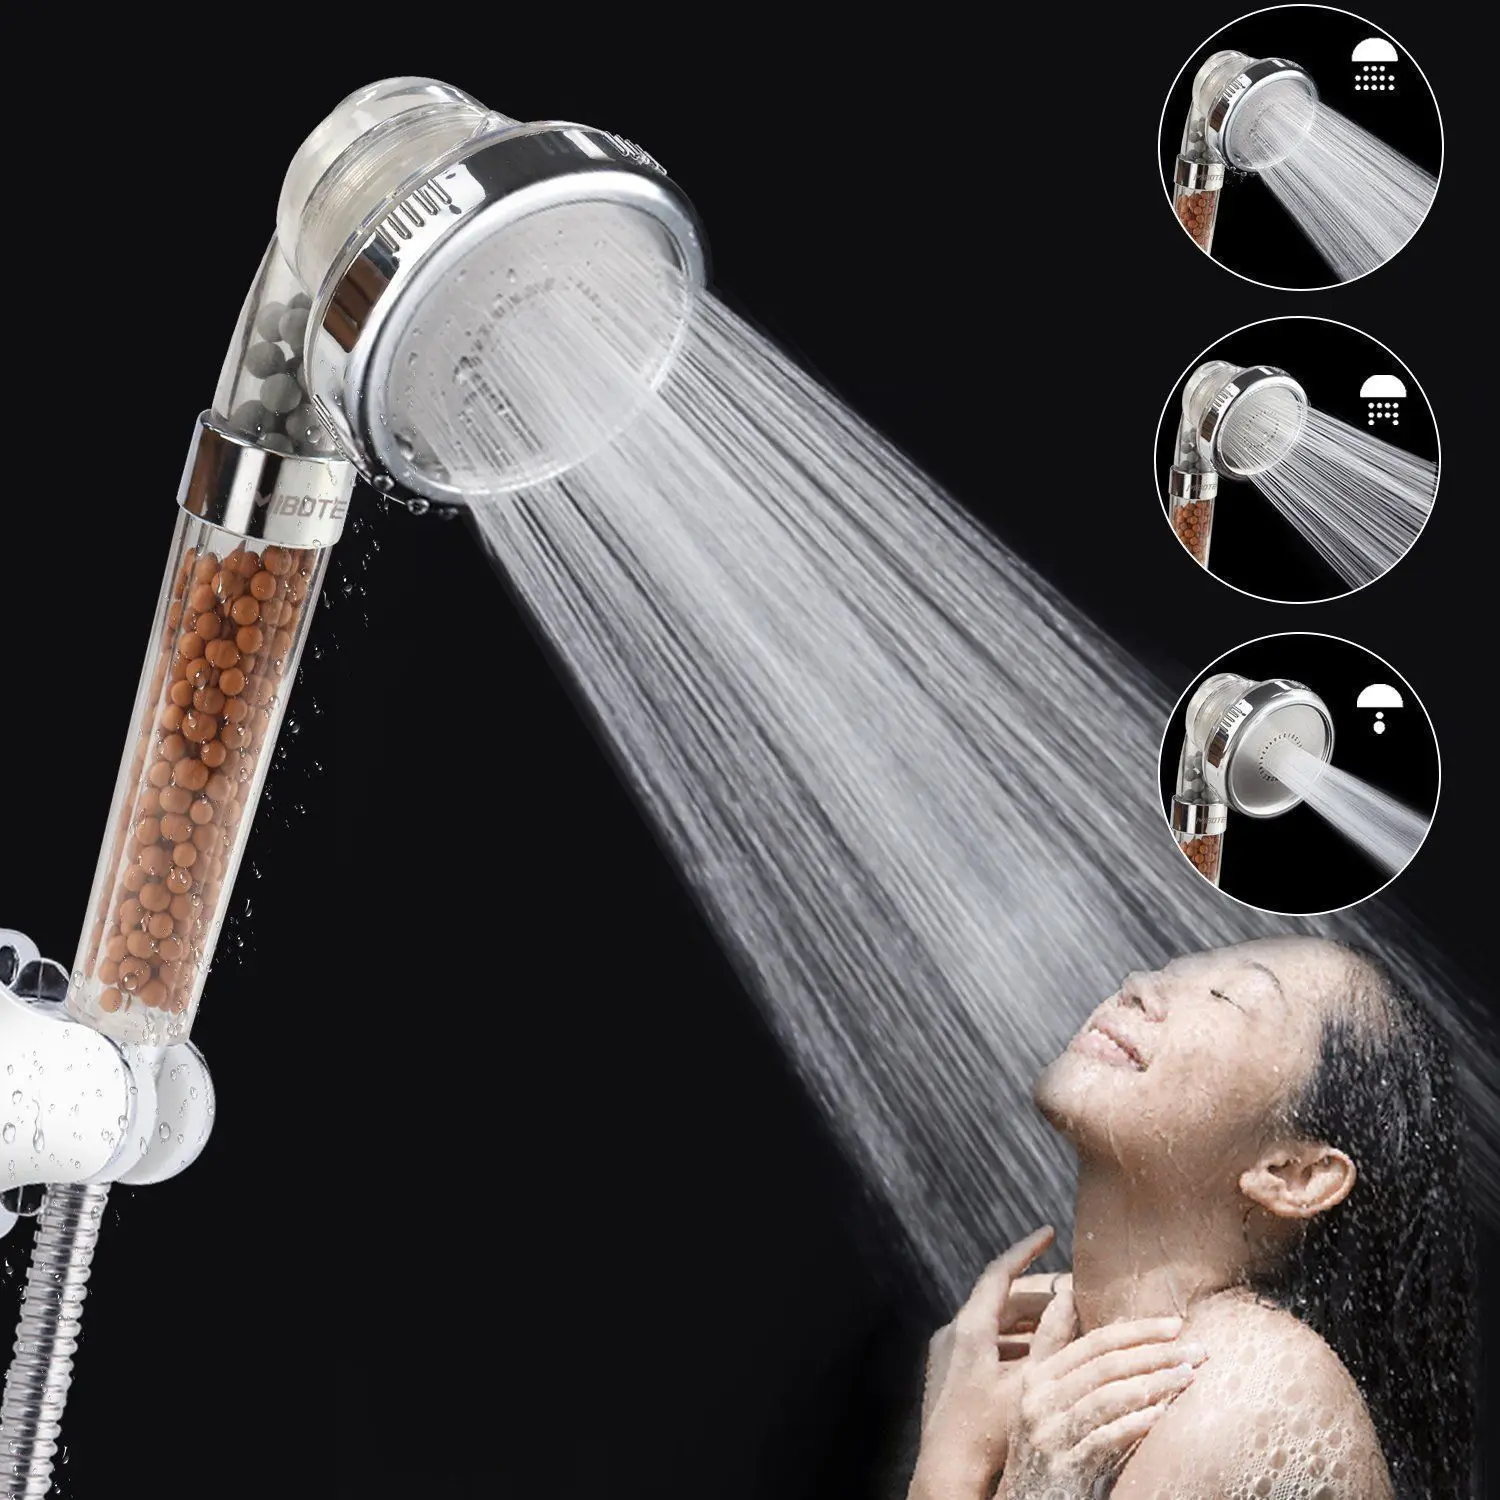 HOAEY Shower Head Ionic Filter Handheld with 3-Way Shower Modes and 200% High Pressure by HOAEY 